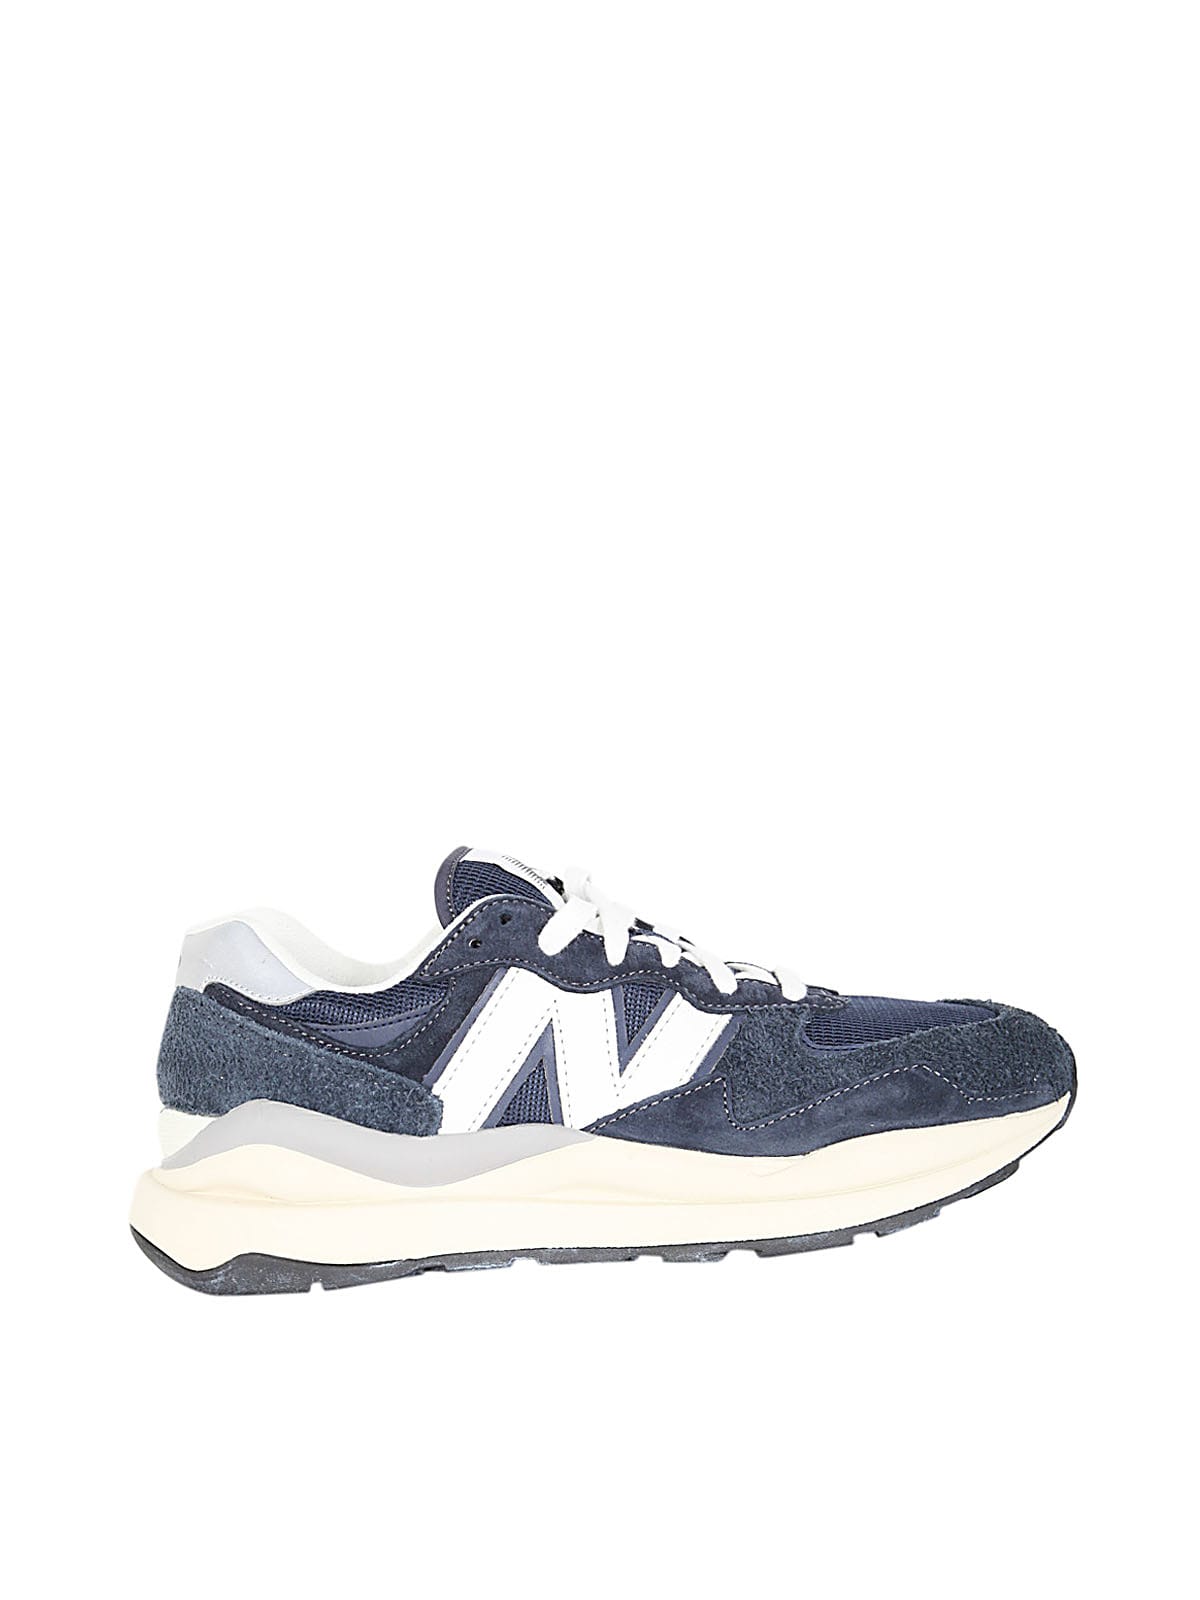 New Balance Lifestyle Sneakers